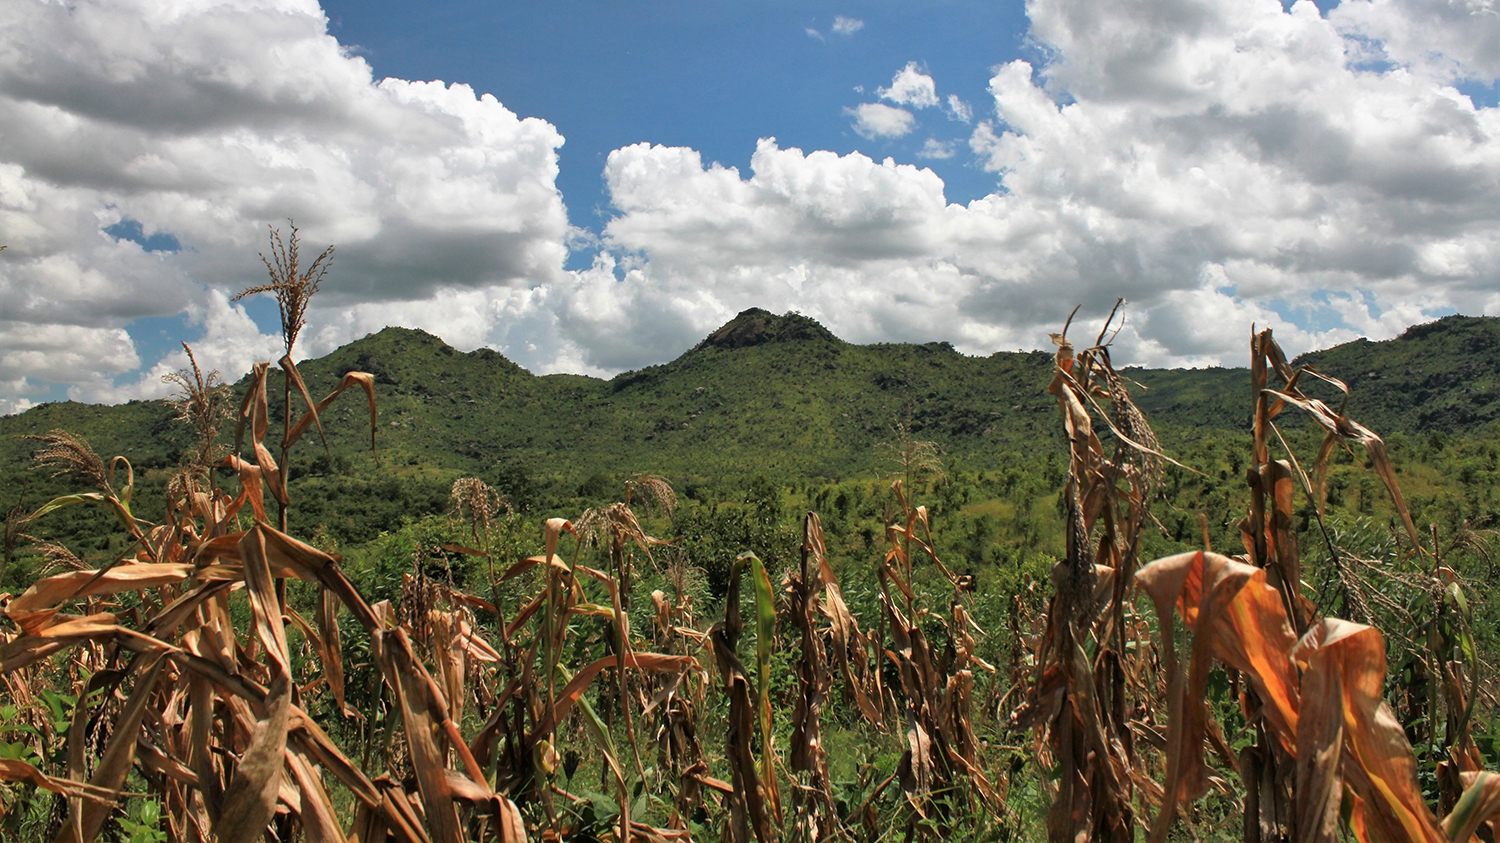 Maize growing in a lush field against a cloudy sky in Malawi.